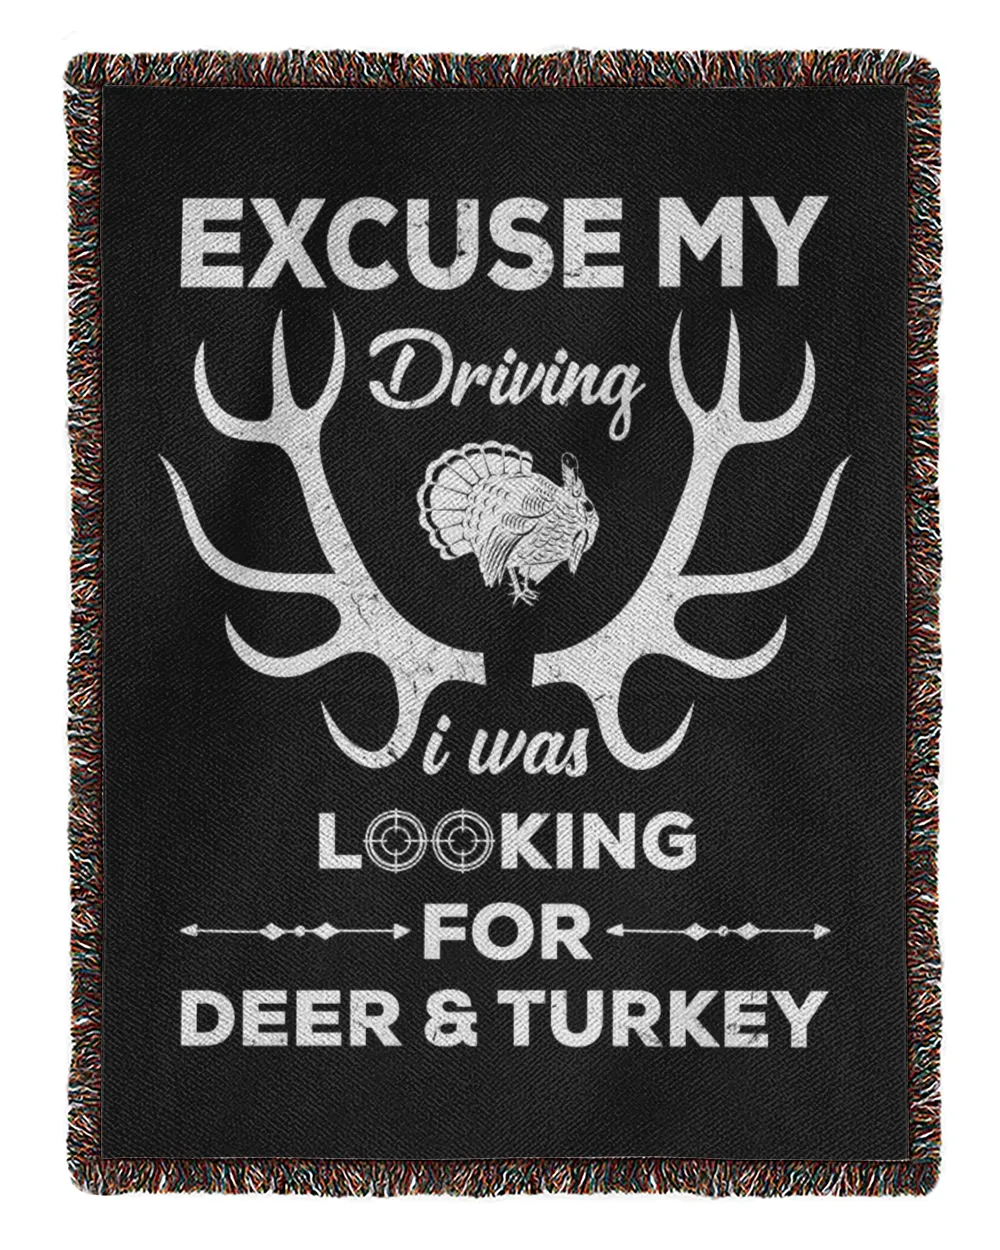 Excuse My Driving I Was Look For Deer & Turkey